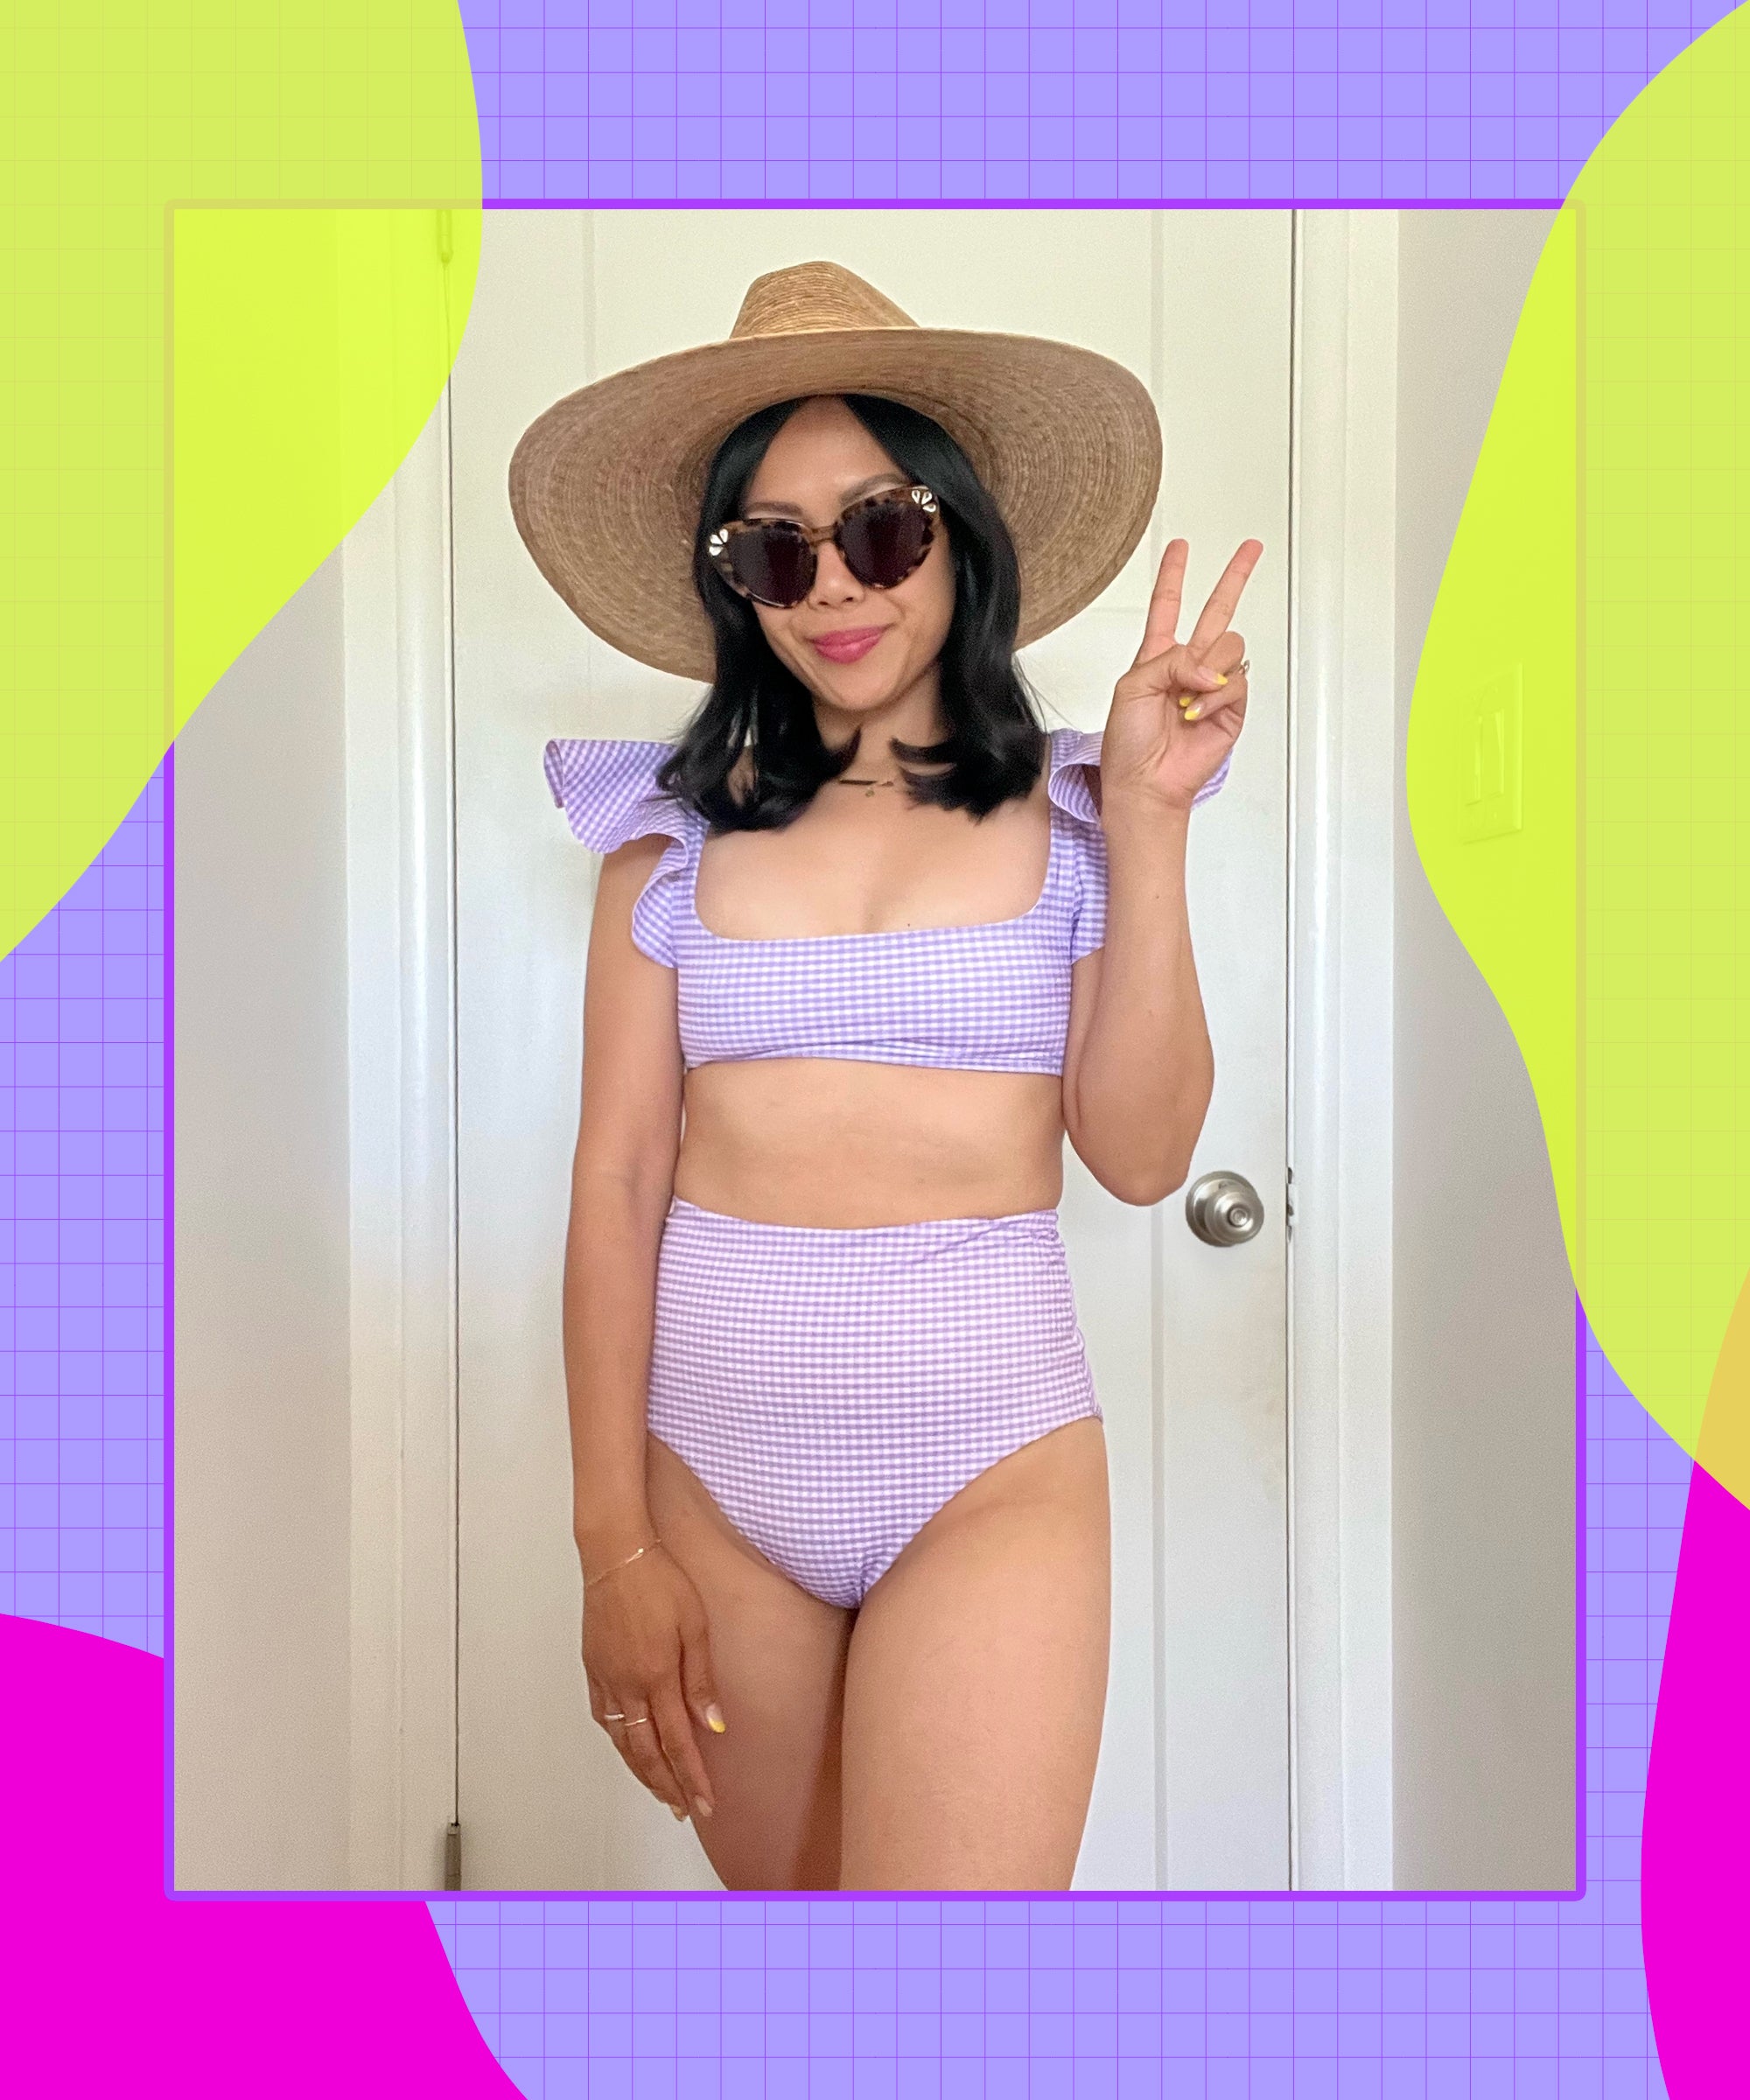 R29 Editors Review New Free People Swim Pieces